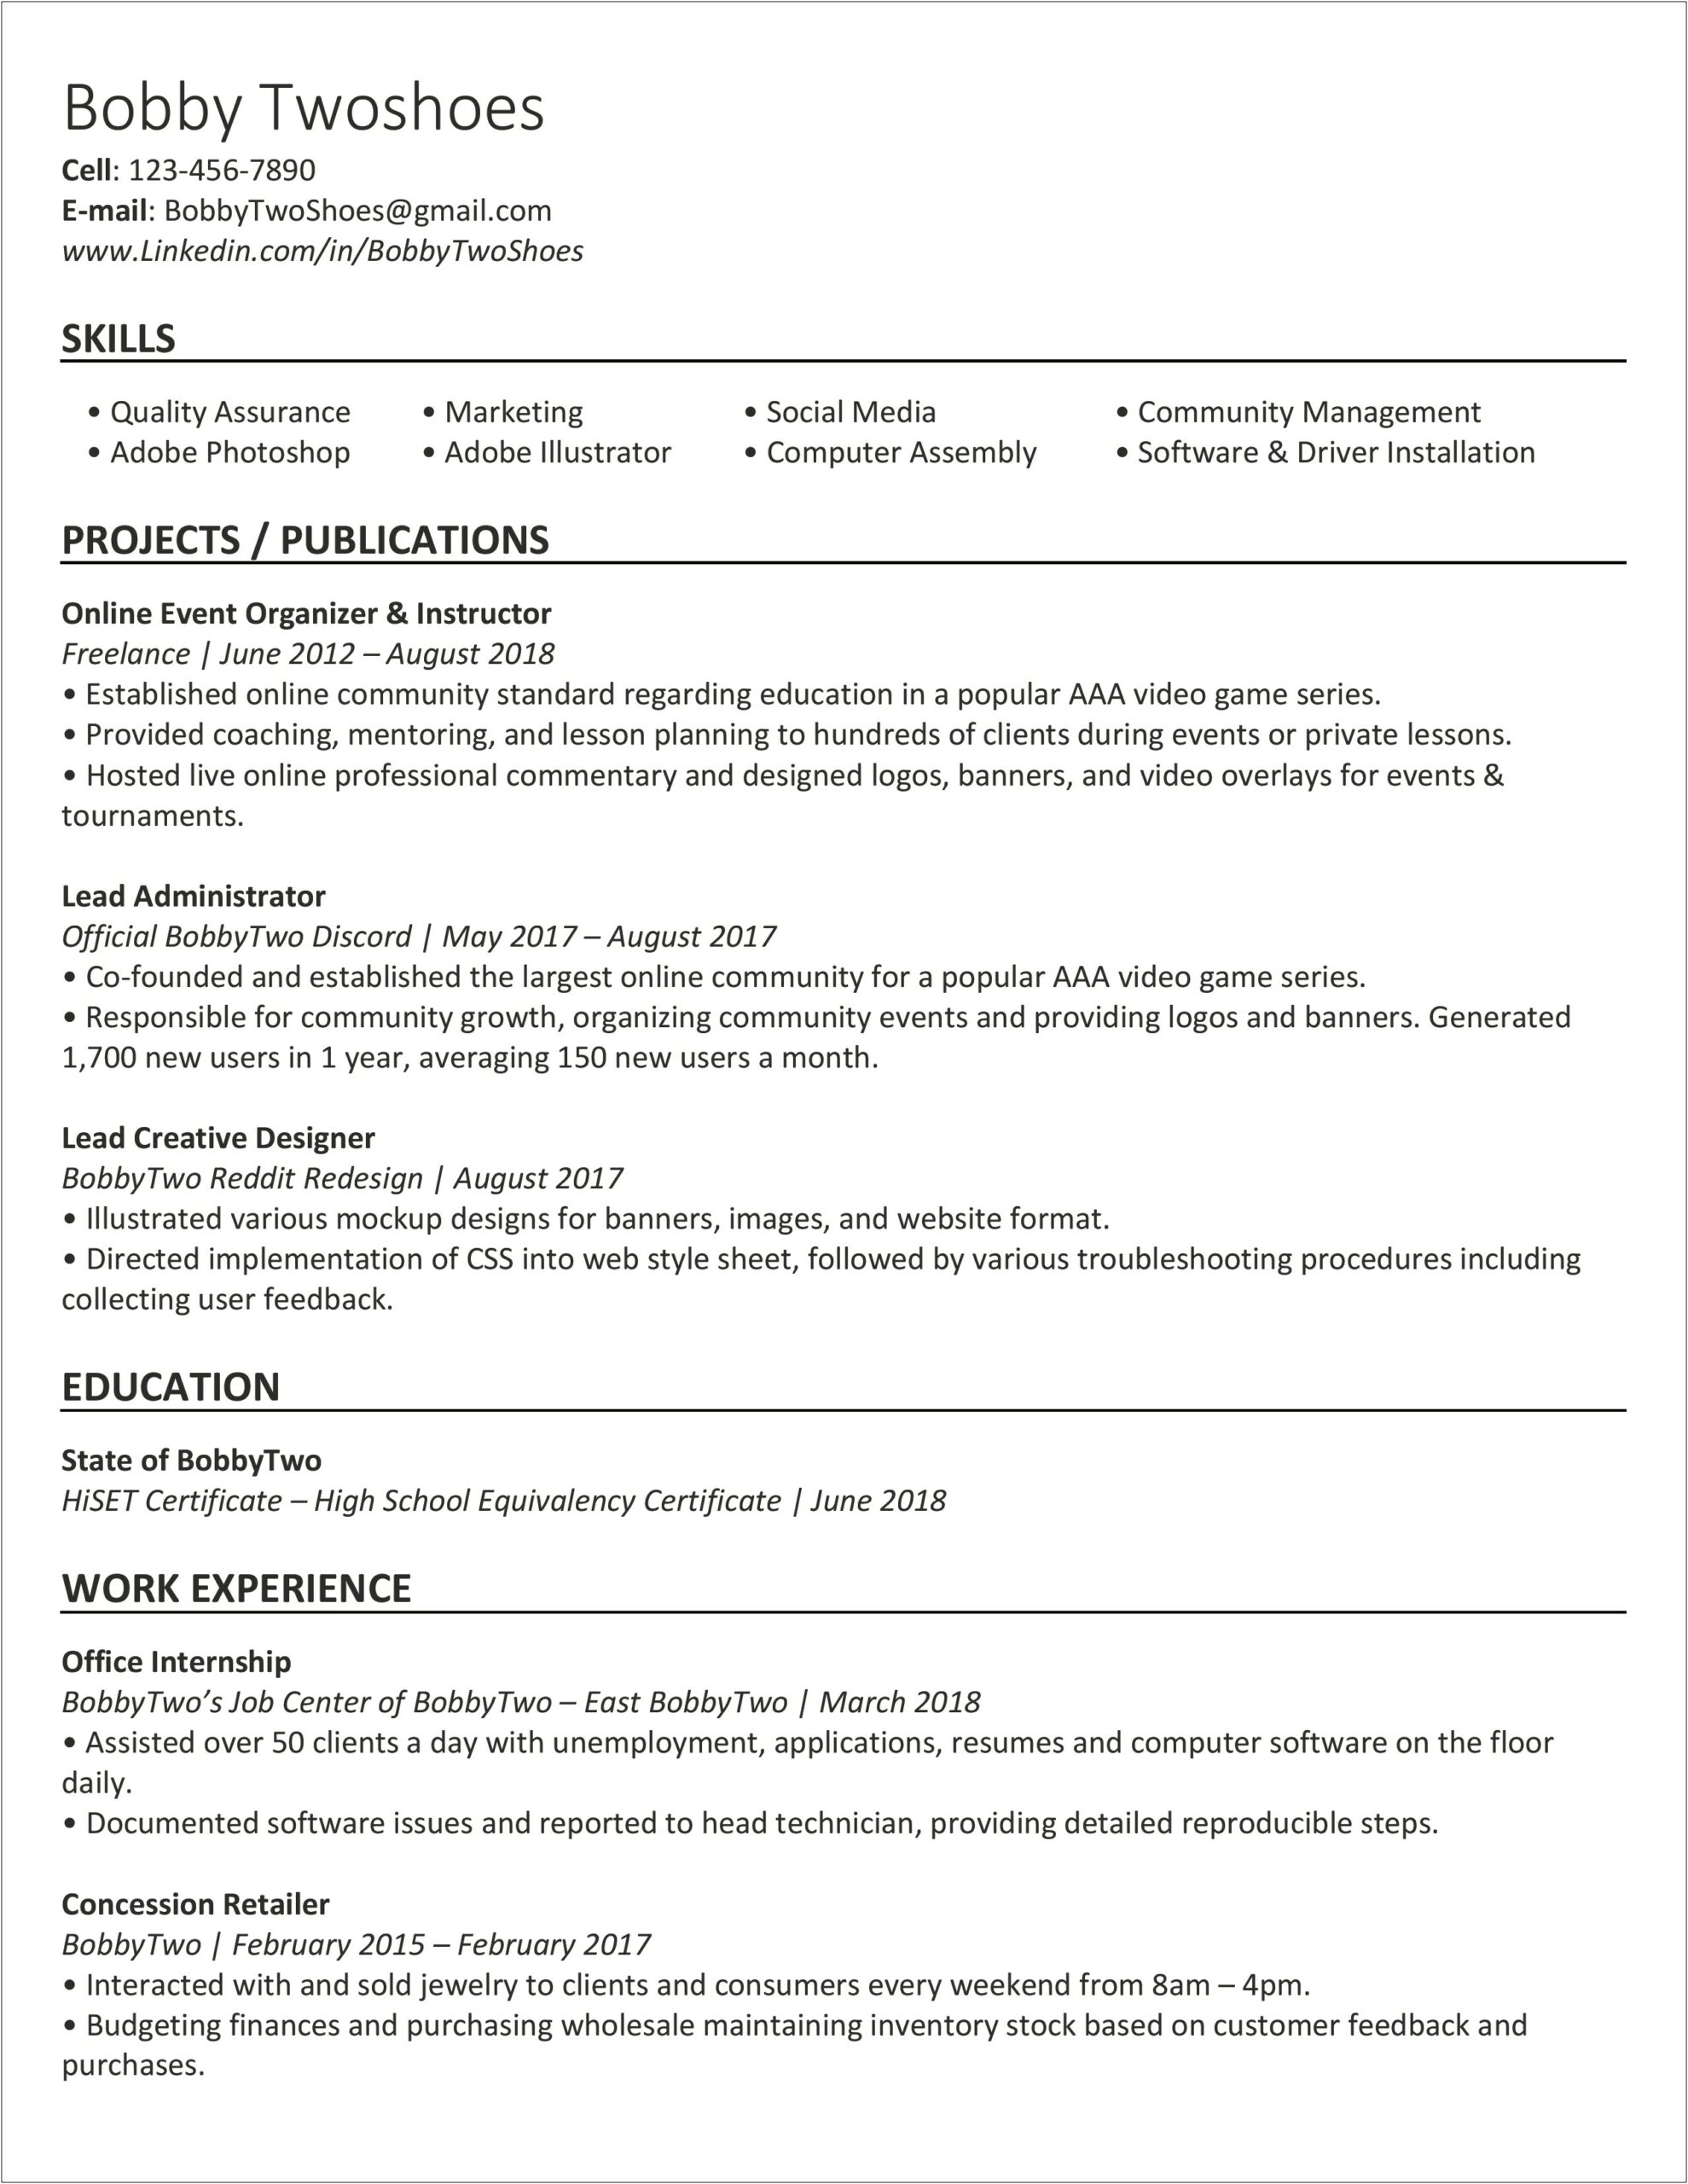 Best Place To Post Resume Reddit